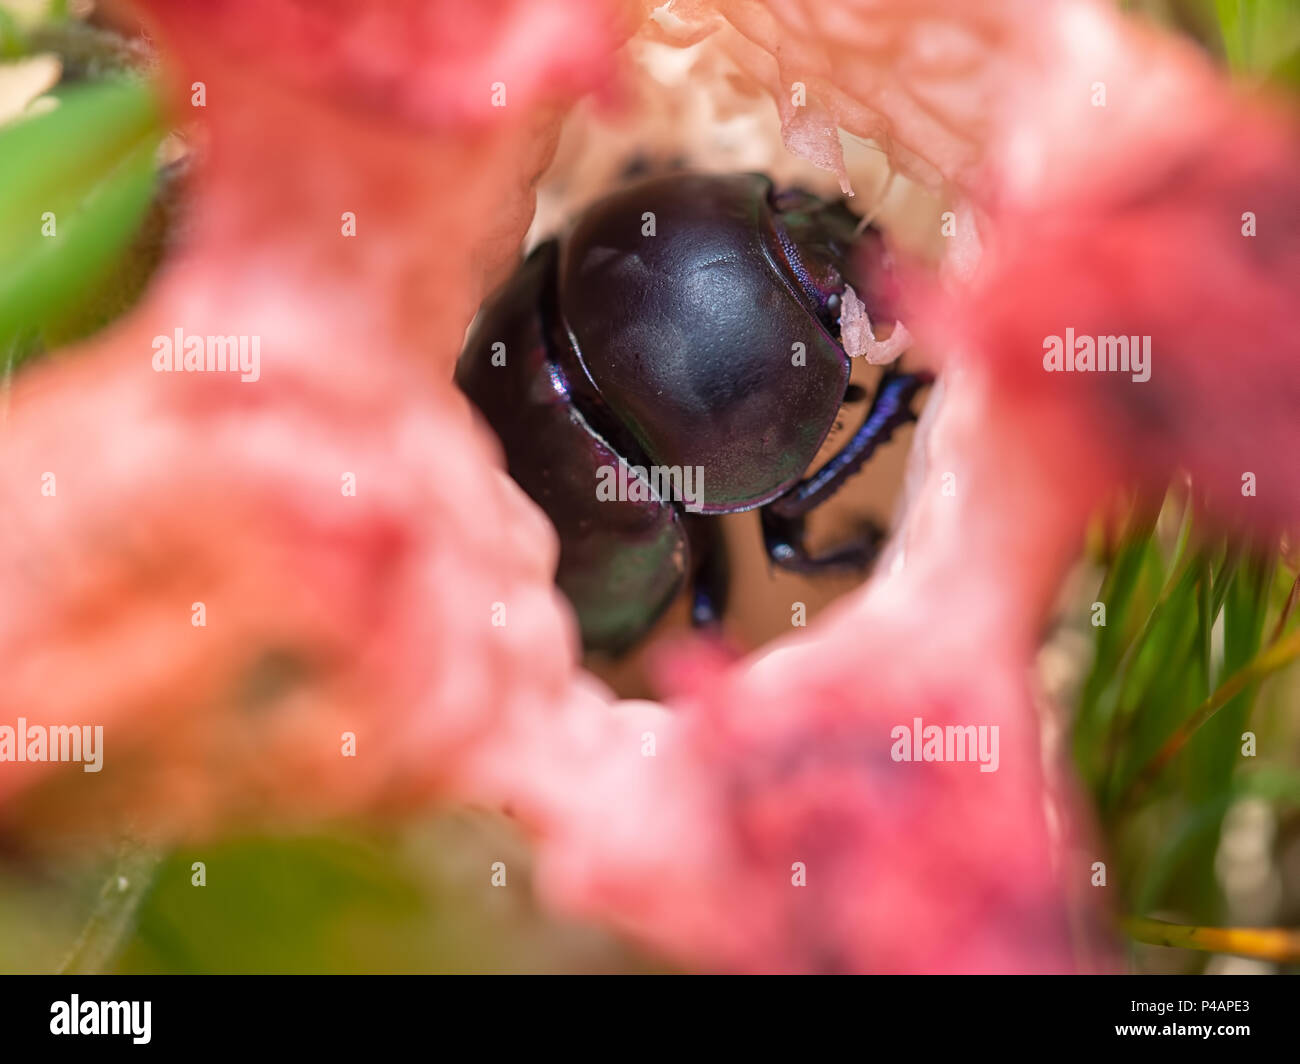 Dung beetle inside Clathrus archeri smelly fungus. Stock Photo